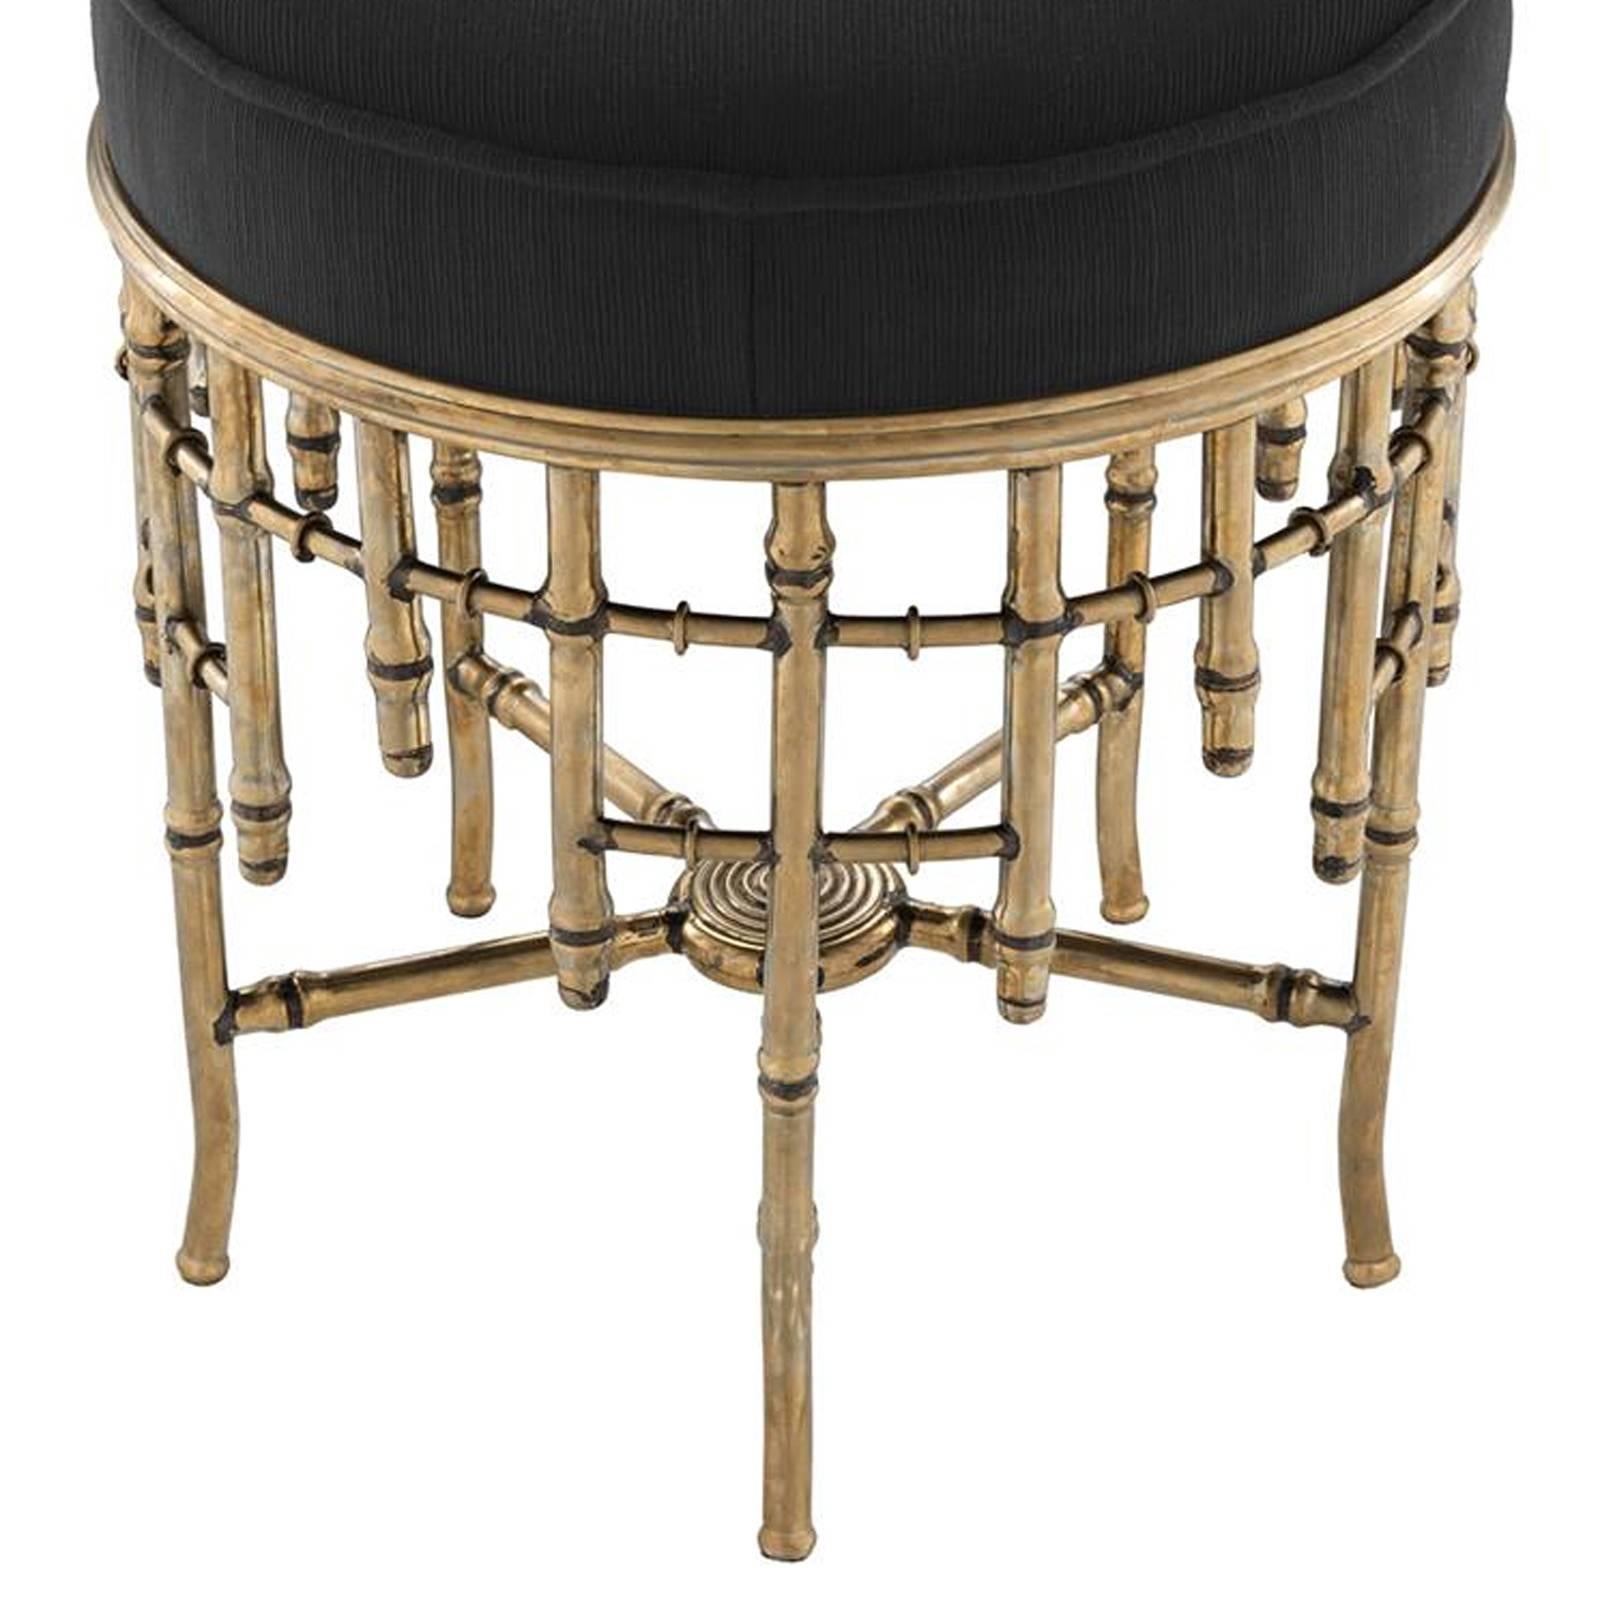 Hand-Crafted Reed Medium in Vintage Brass Finish and Black Velvet Seat